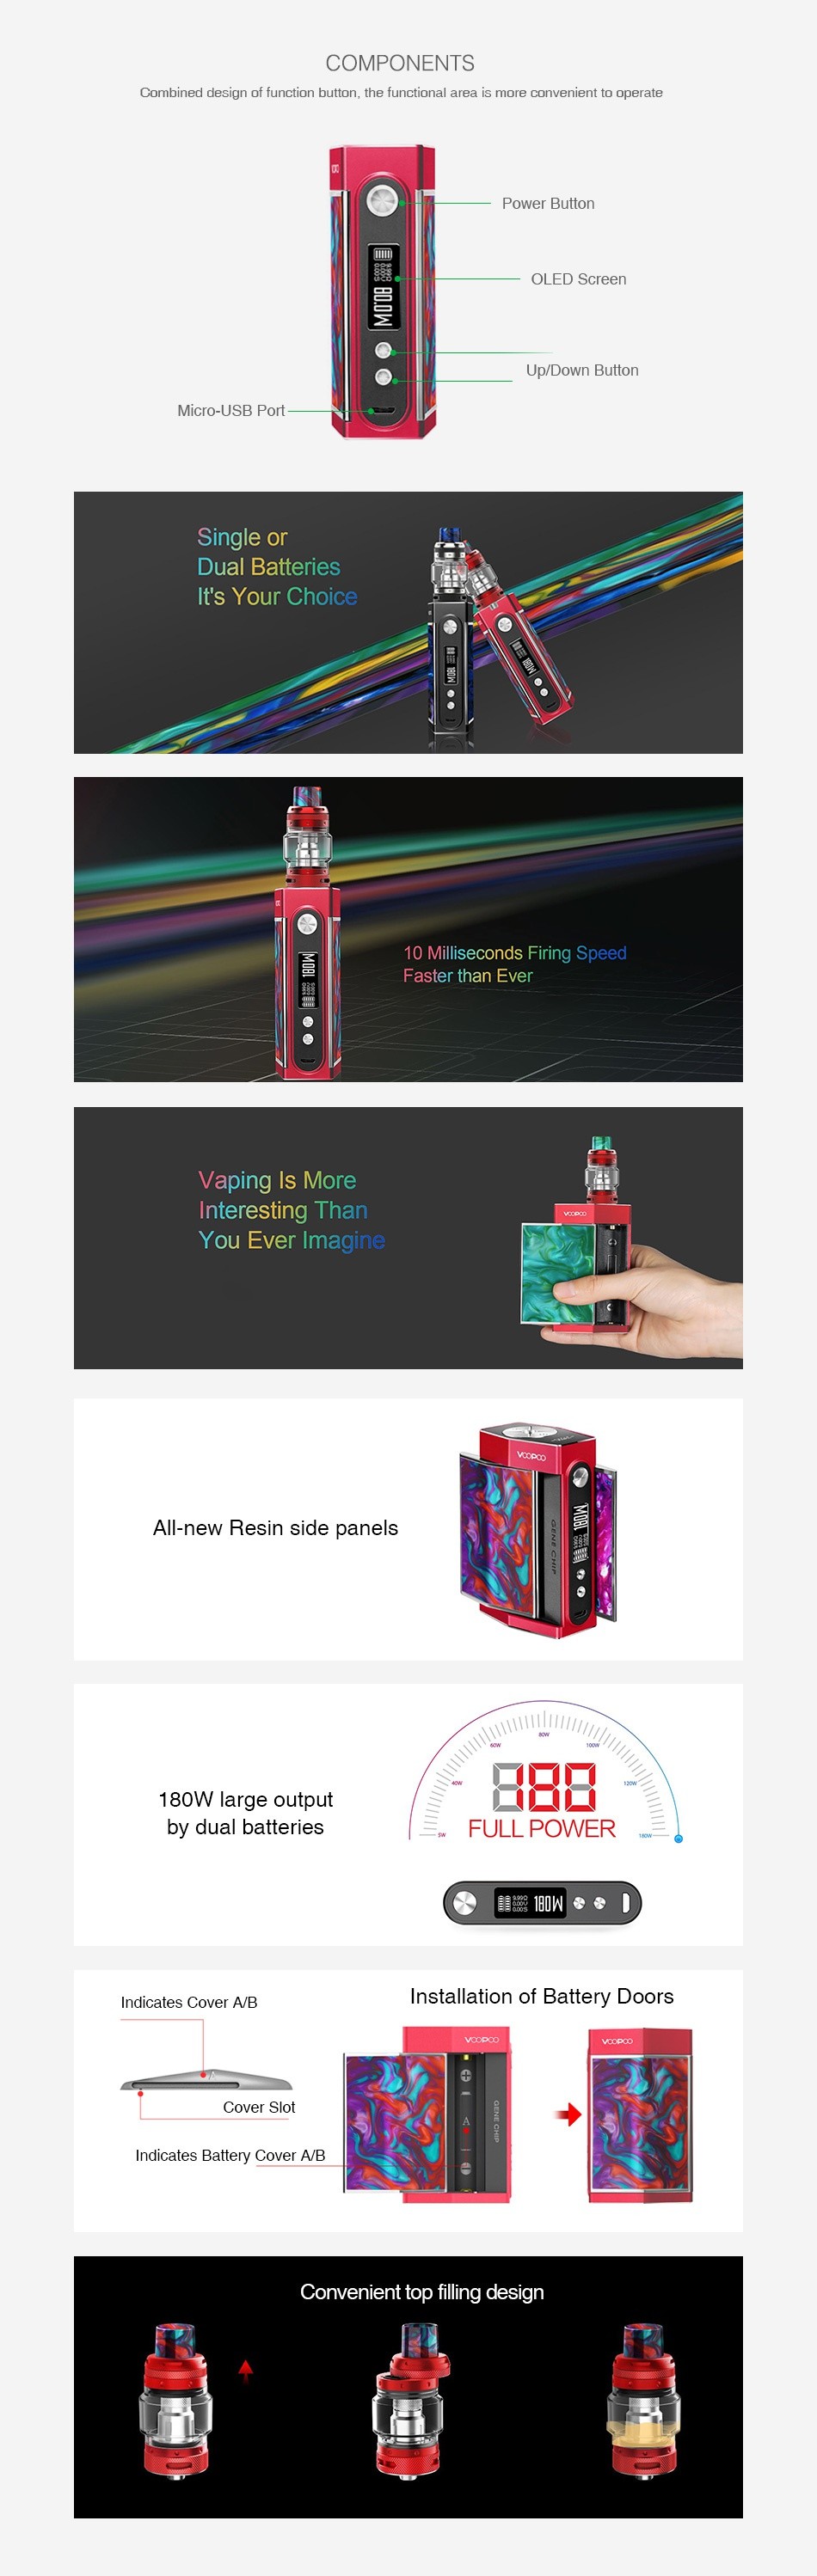 VOOPOO TOO Resin 180W TC Kit with UFORCE T1 COMPONENTS Combined design of tunction button  the functional area is more convenient to operate    OLED Scrccn Up Down Butto Micro LISR Port Single or Dual batteries It s Your Choice 10 Milliseconds Firing Speed Faster than Ever Vaping Is More Interesting Than You ever imagine All new Resin side panels 180W large output by dual batteries FULL POWER nd catcs cover A Installation of Battery Doors Convenient top filling design